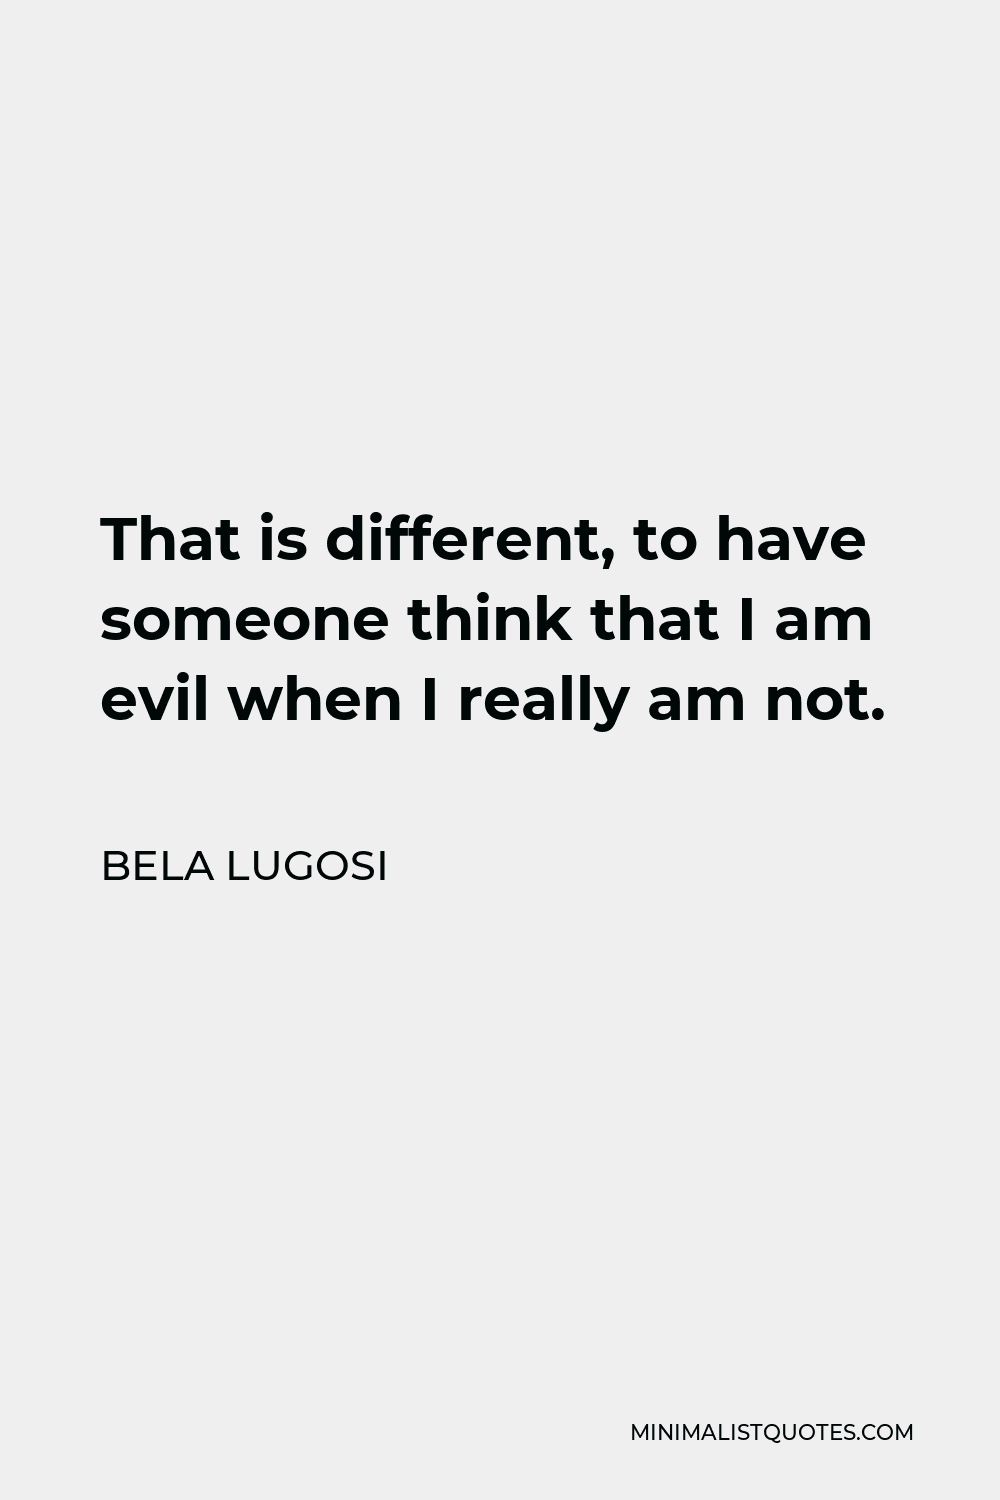 Bela Lugosi Quote - That is different, to have someone think that I am evil when I really am not.